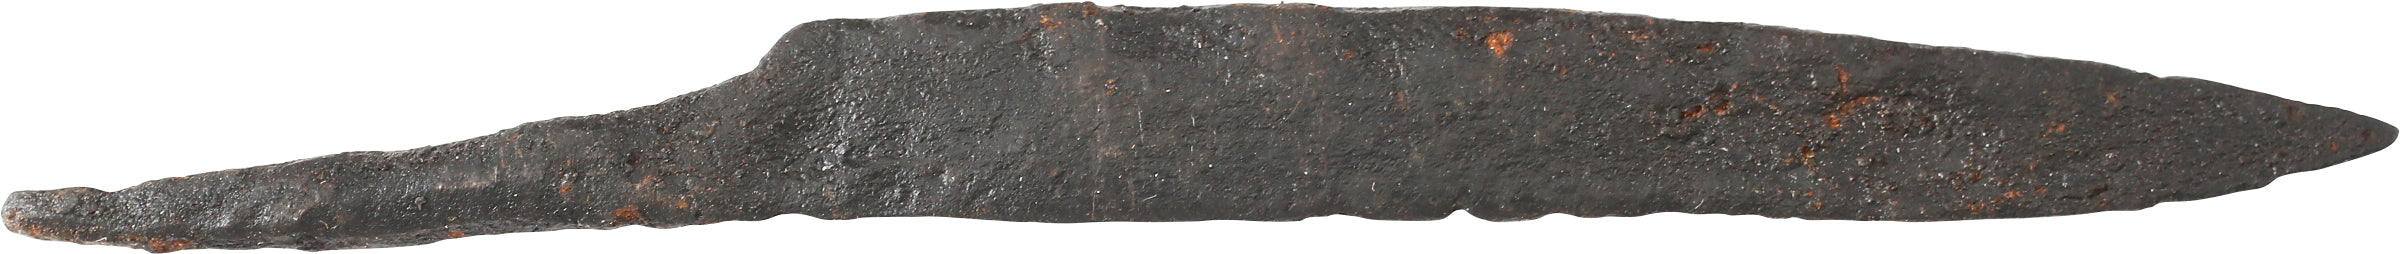 VIKING SIDE OR POUCH KNIFE 9th-10th CENTURY AD - Fagan Arms